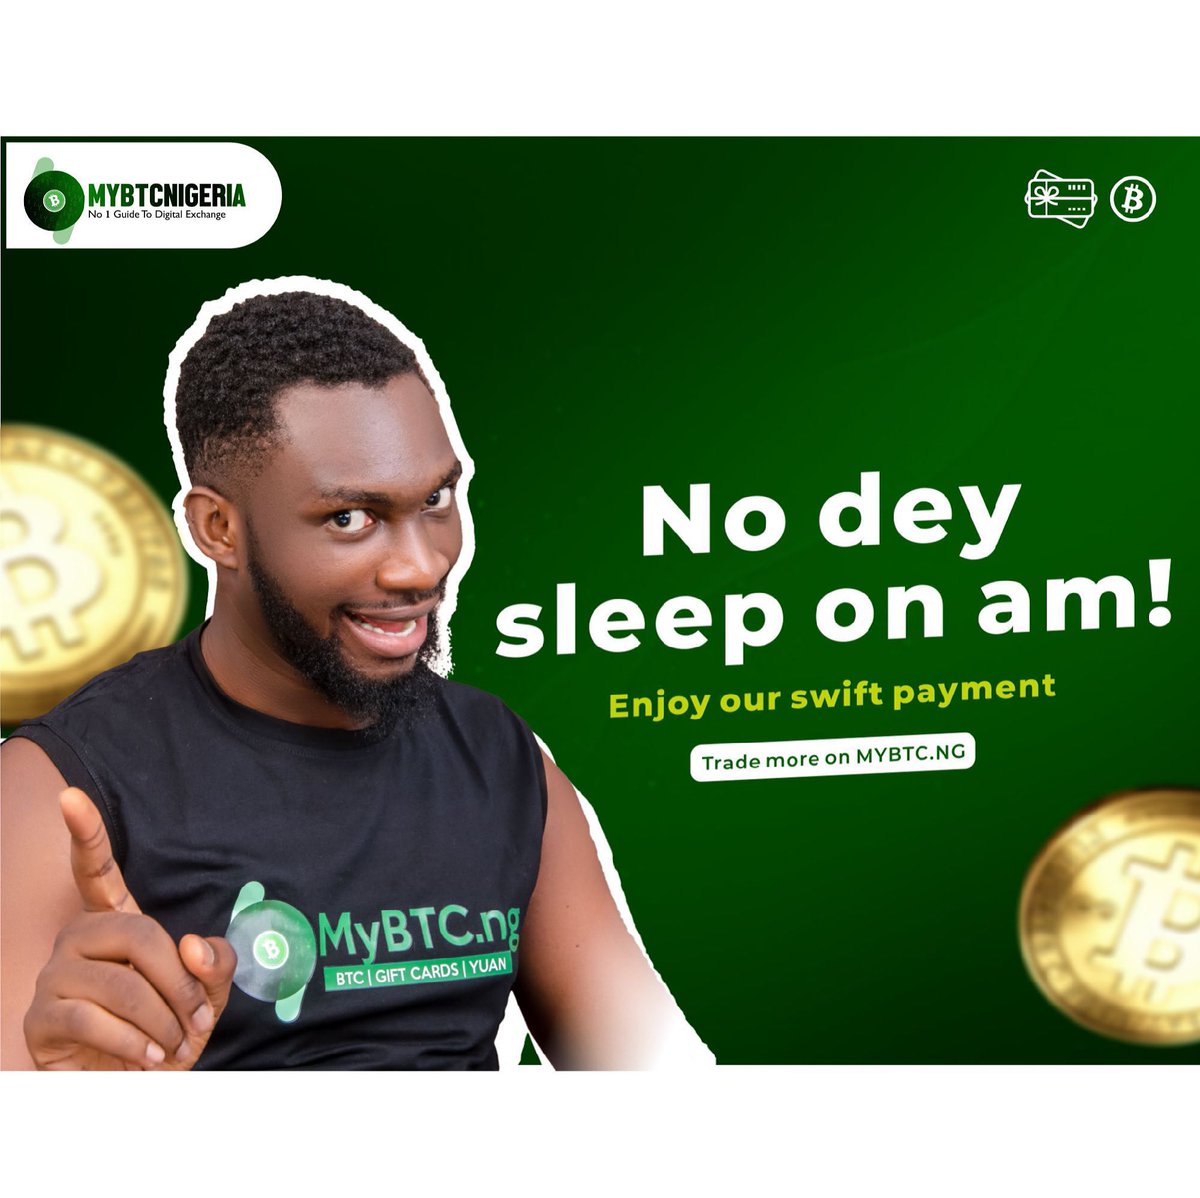 Our rates are nice at Mybtc.ng no sleep on am 😉 

@btc_nigeria  is actively buying Bitcoin and giftcards 24/7 at the sweetest rates with instant Naira payment right now 💸🔥

Log on to Mybtc.ng today 😉
 #MyBtcNg #cryptocurrency